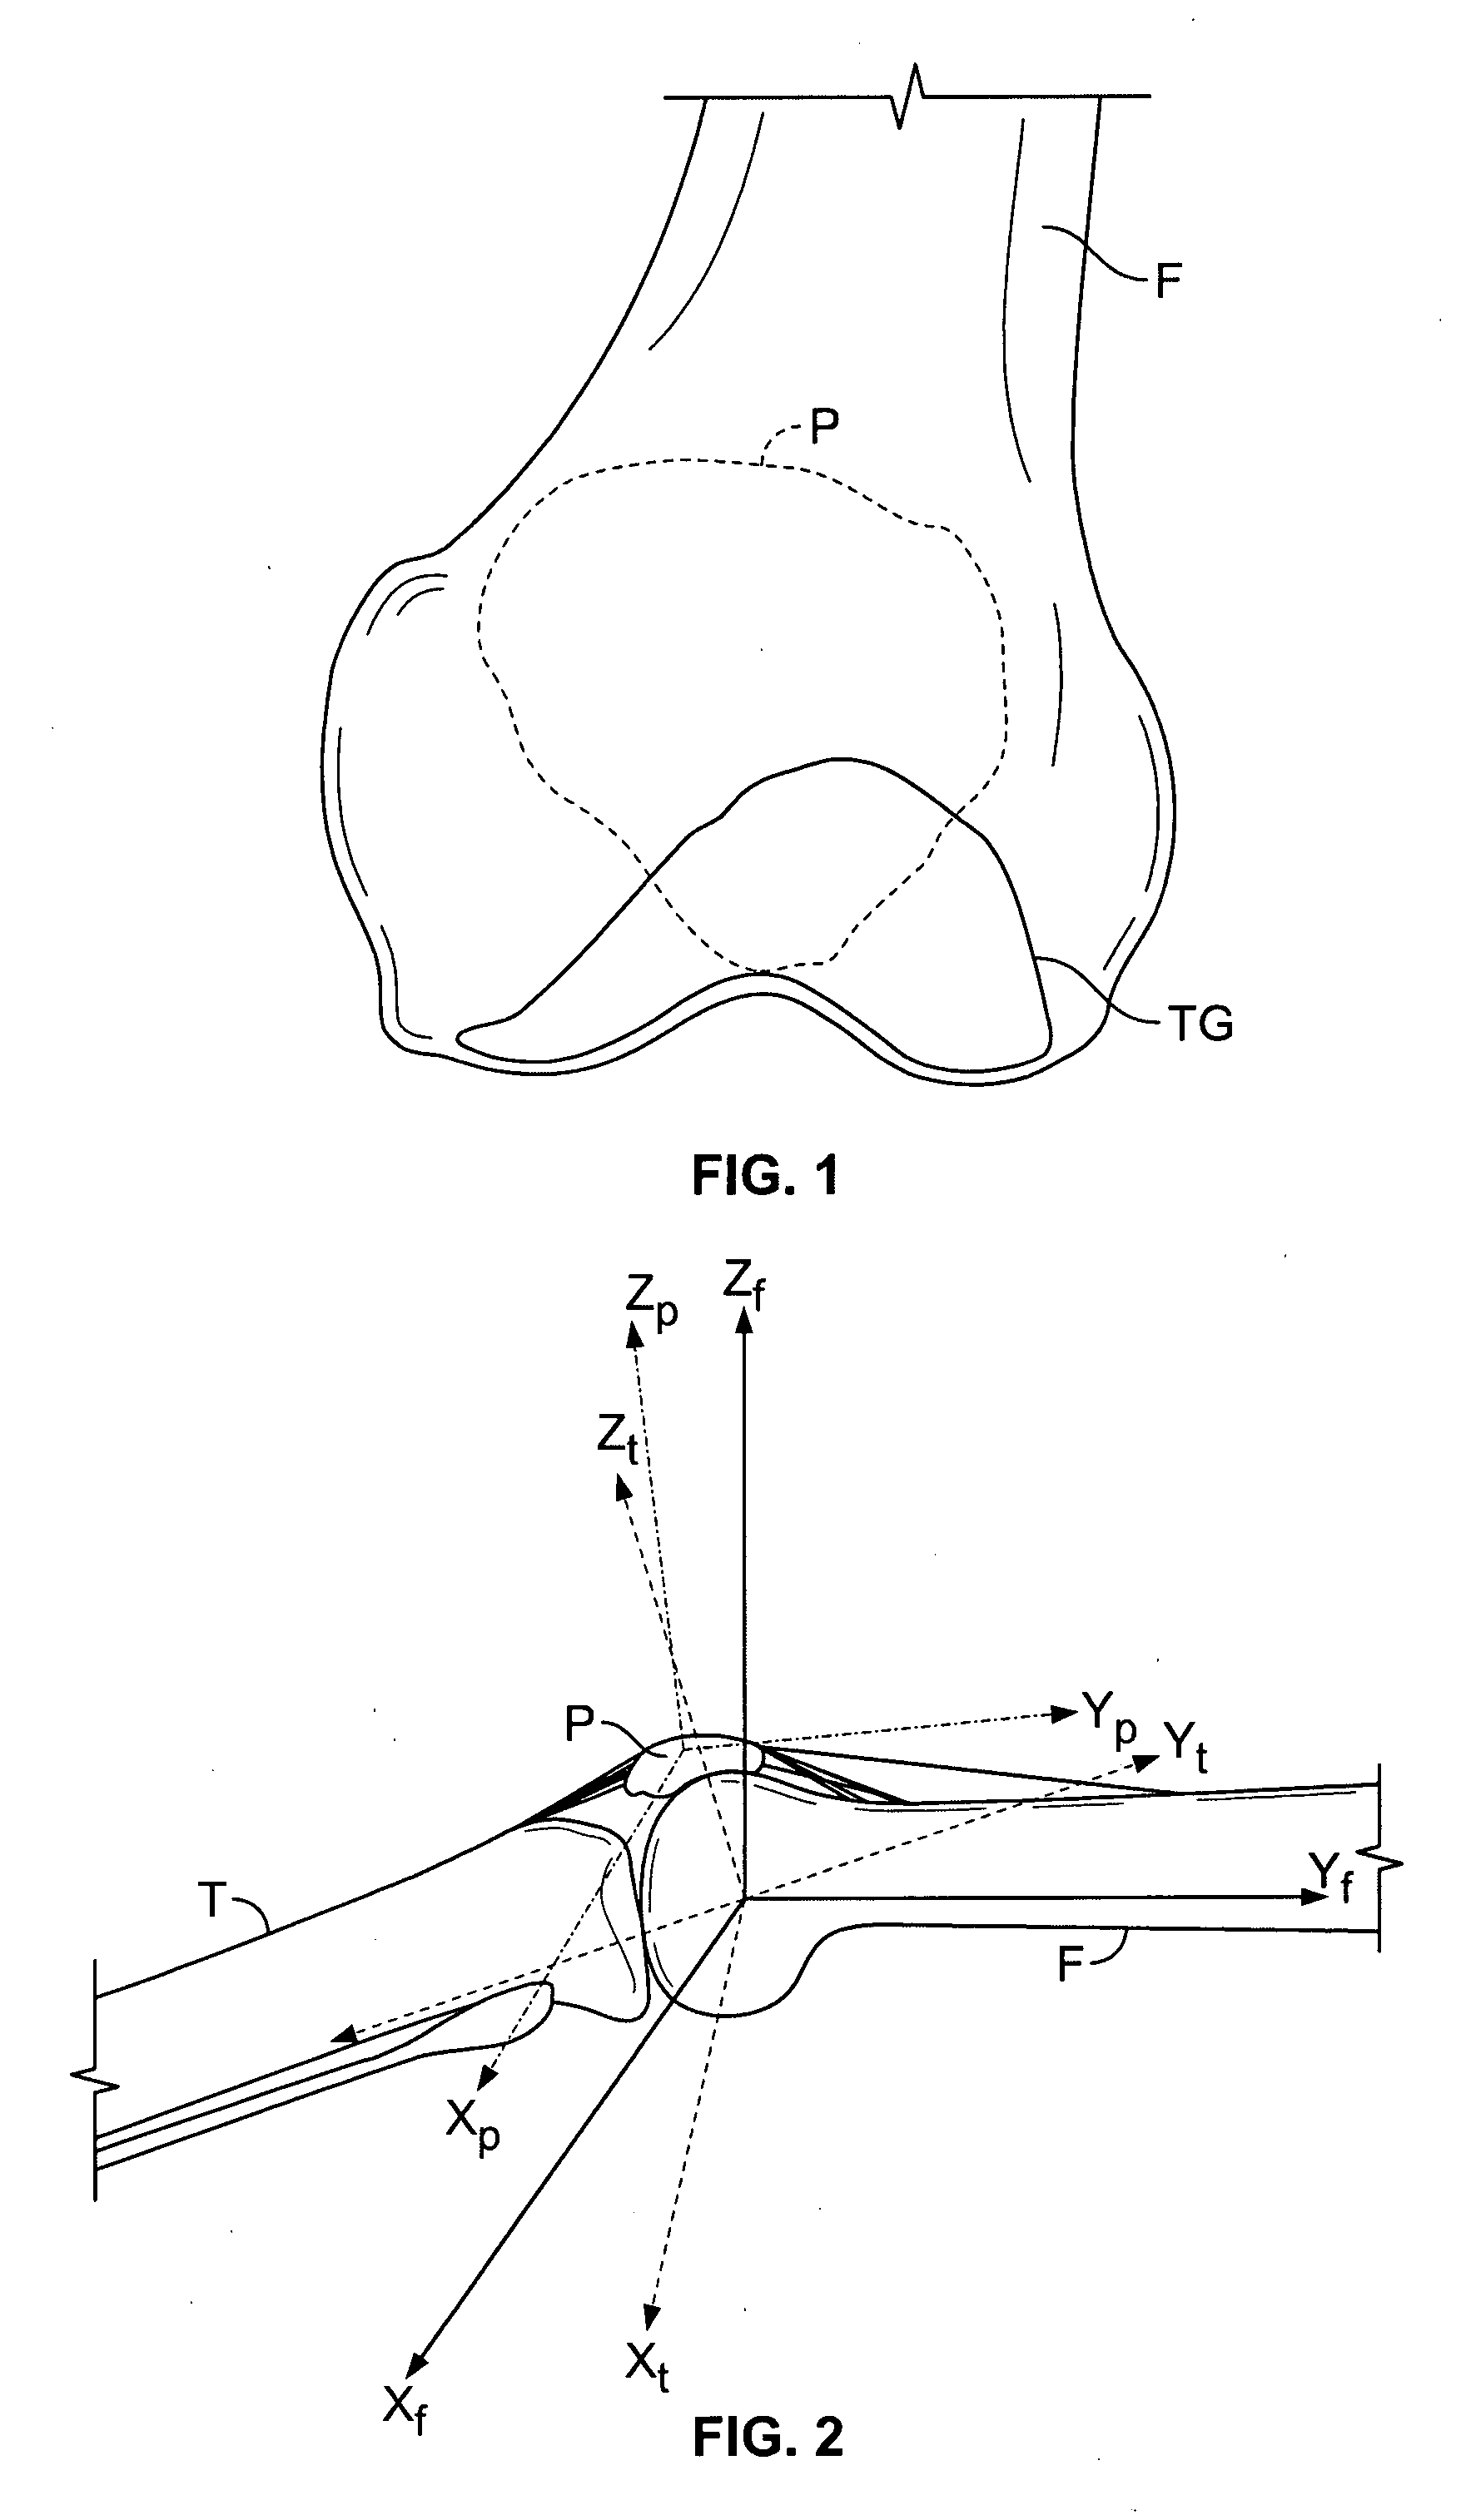 System and method for diagnosing and treating patellar maltracking and malalignment